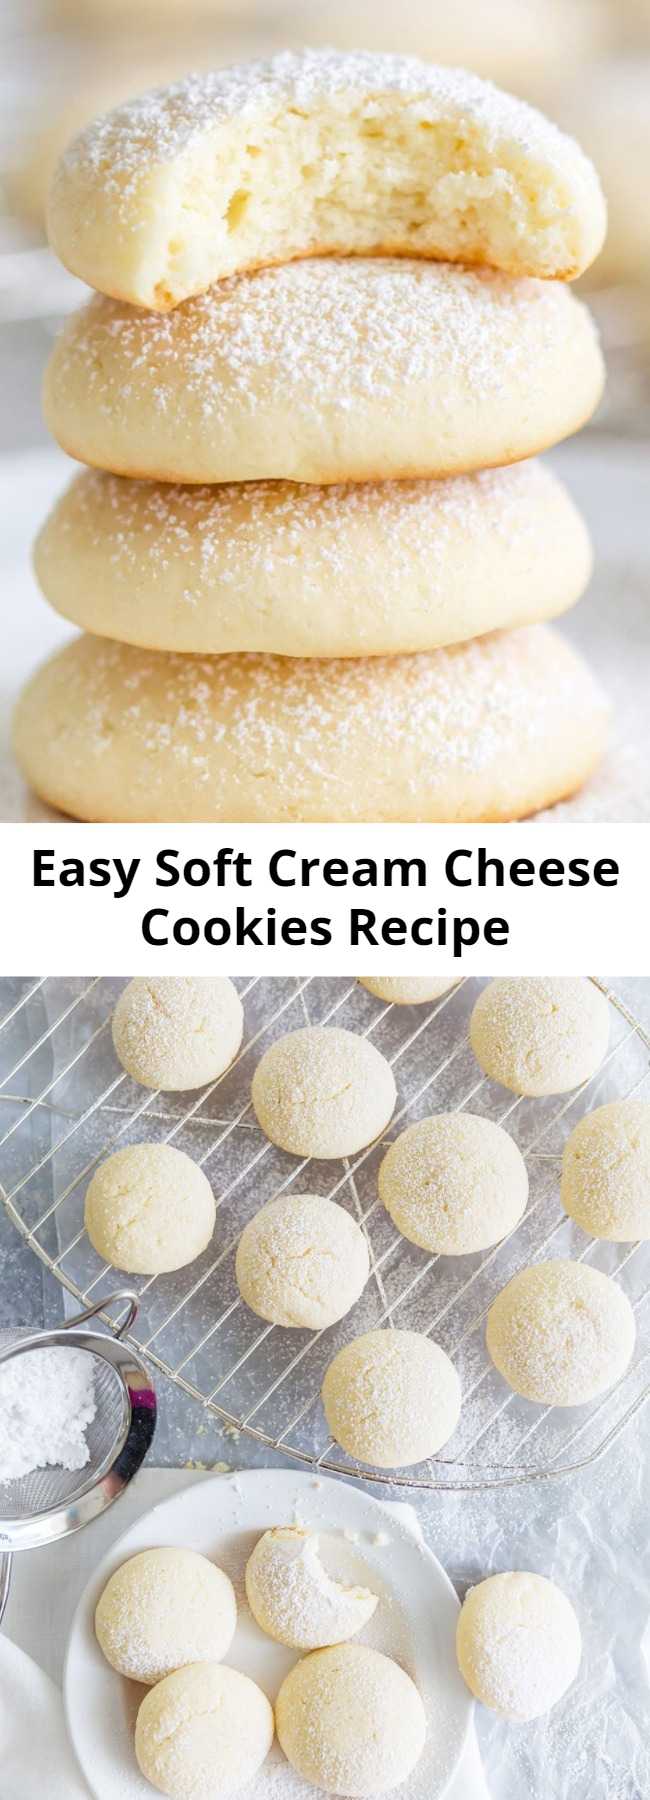 Easy Soft Cream Cheese Cookies Recipe - Pillowy soft cookies that melt in your mouth! Cream cheese cookies are the most heavenly little bites of sweetness! They’re addicting; you’ve been warned! #creamcheesecookies